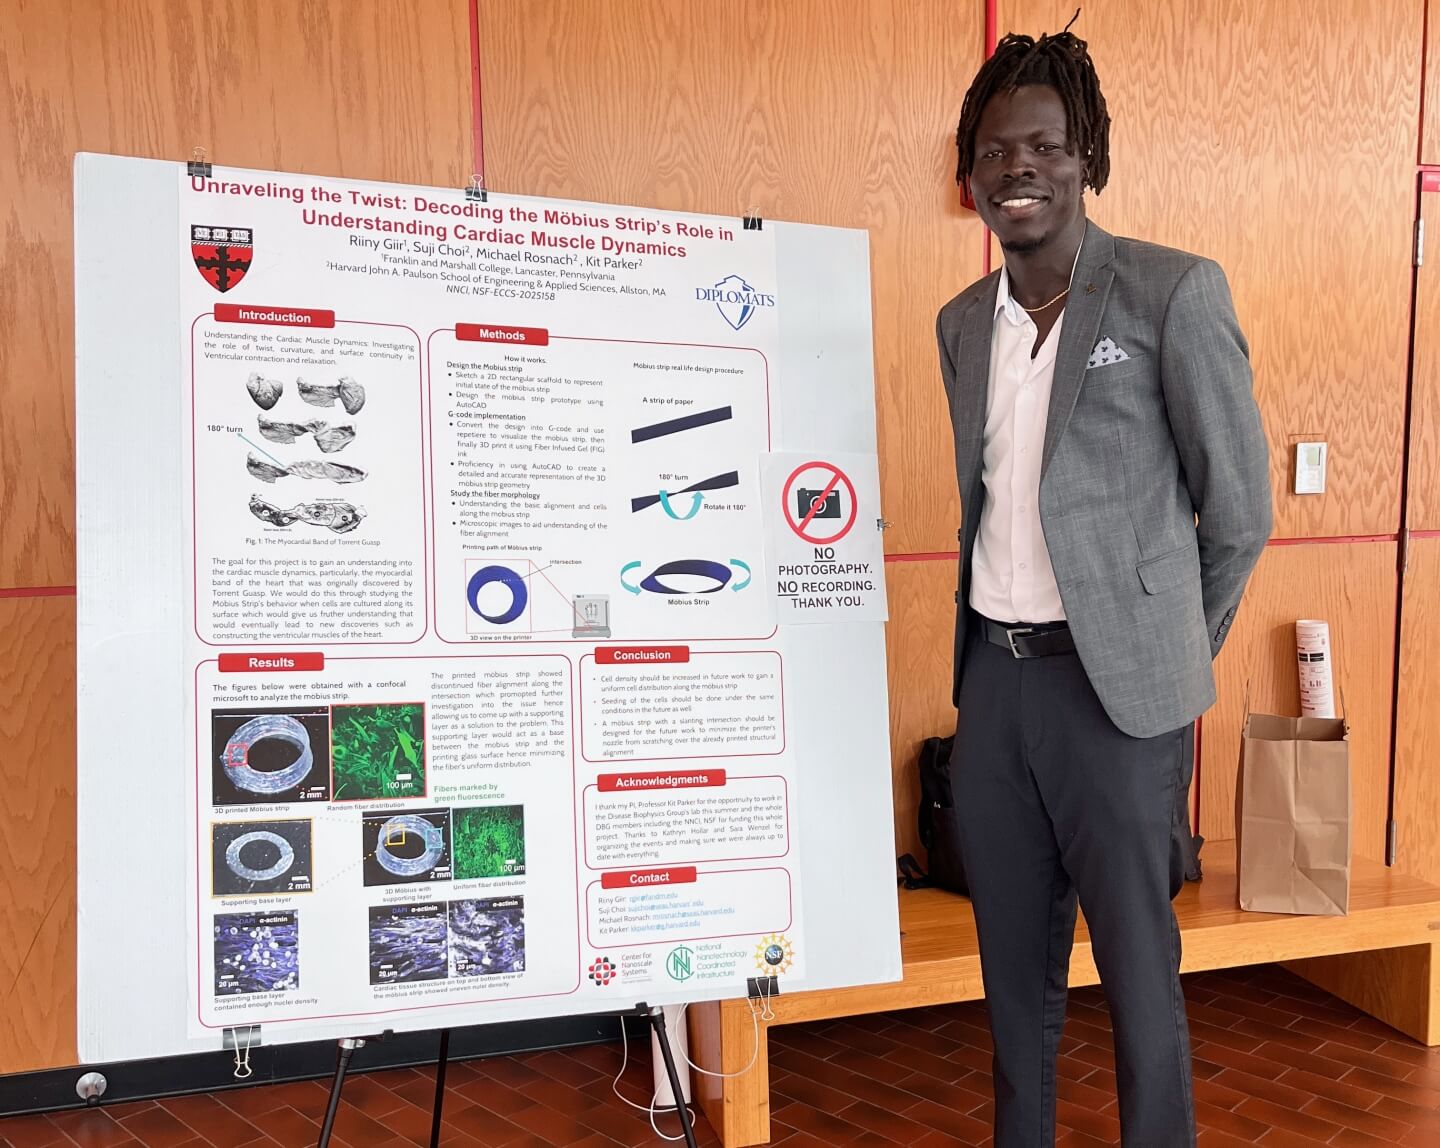 Riiny Giir, a rising junior computer science major at Franklin & Marshall College, with his REU research poster